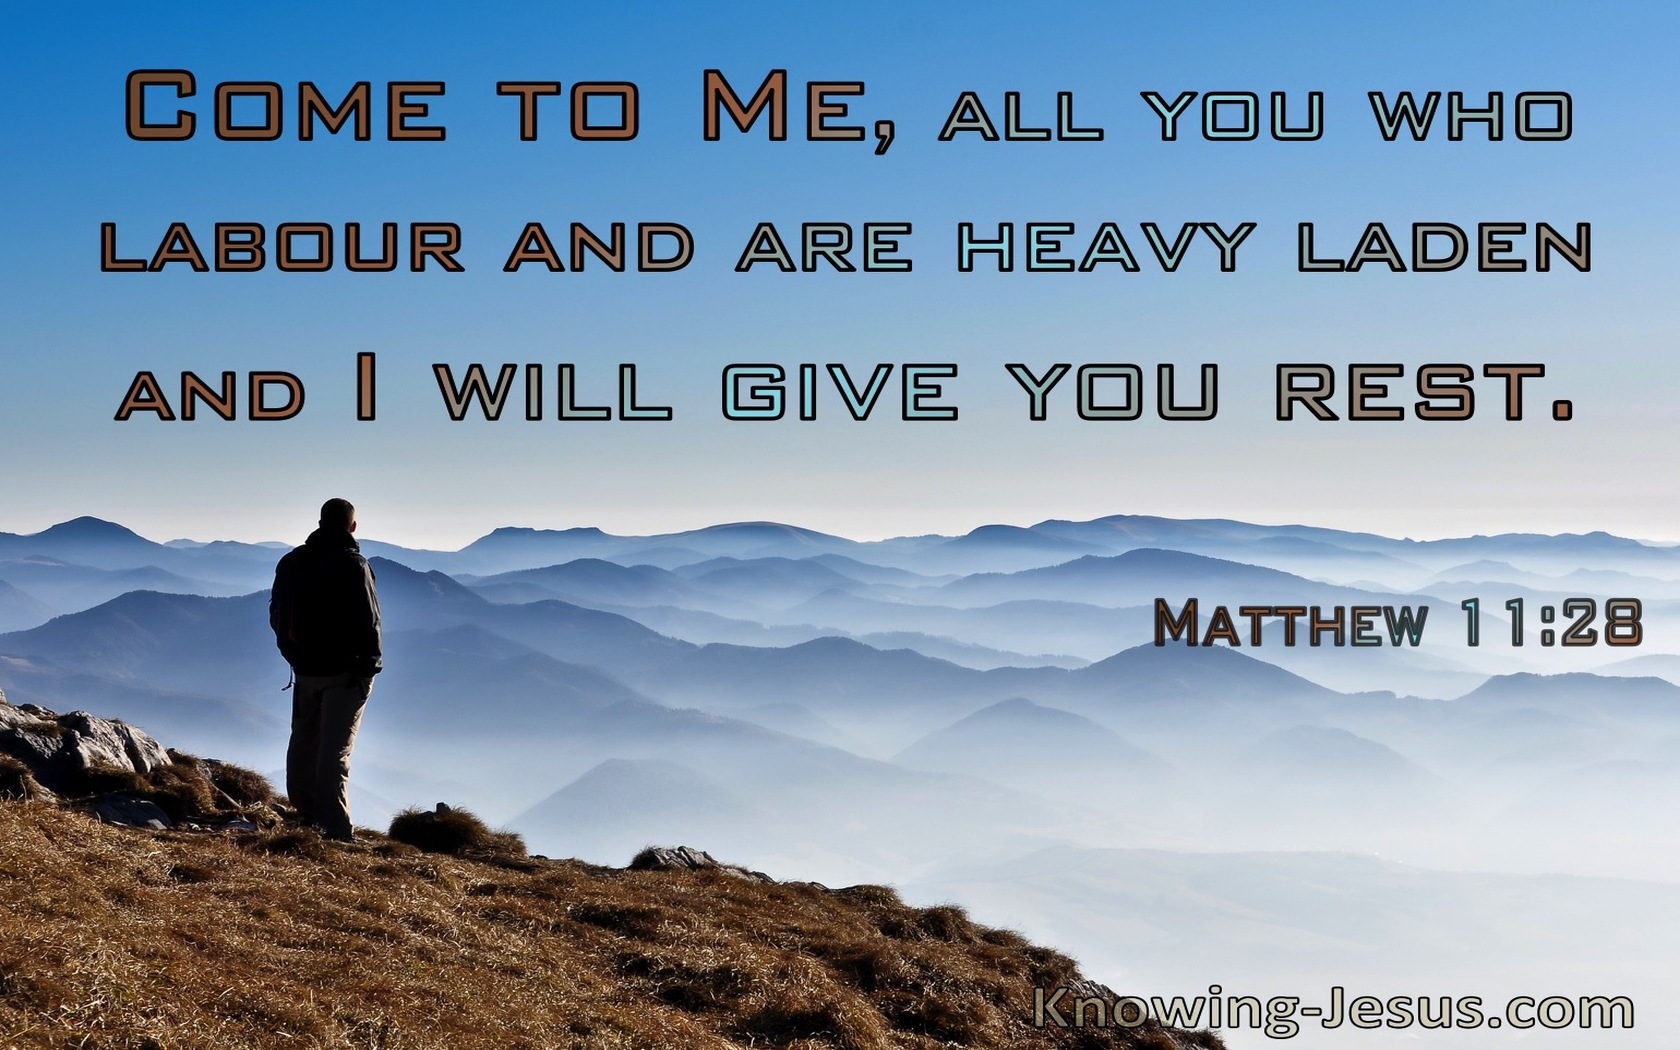 Matthew 11:28 Come To Me And I Will Give You Rest (blue)